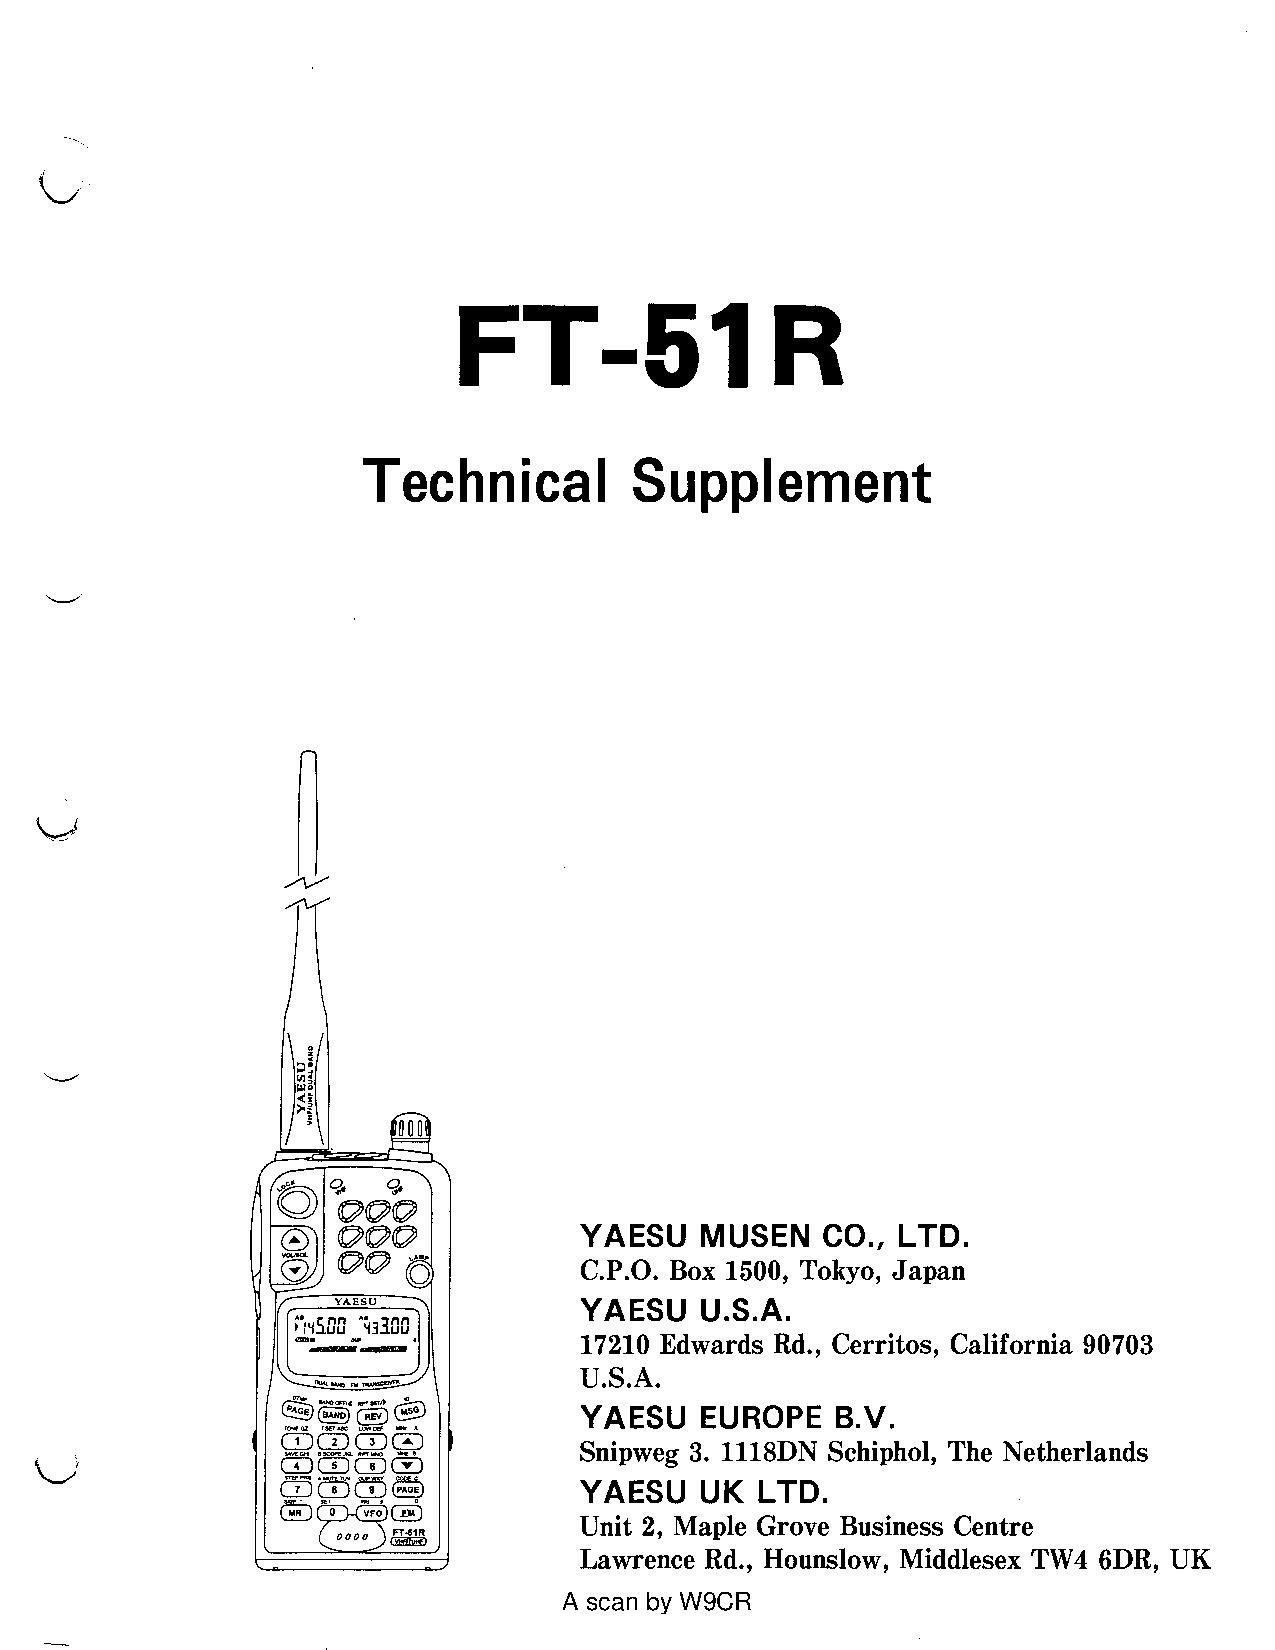 FT-51R Technical Supplement Service Manual